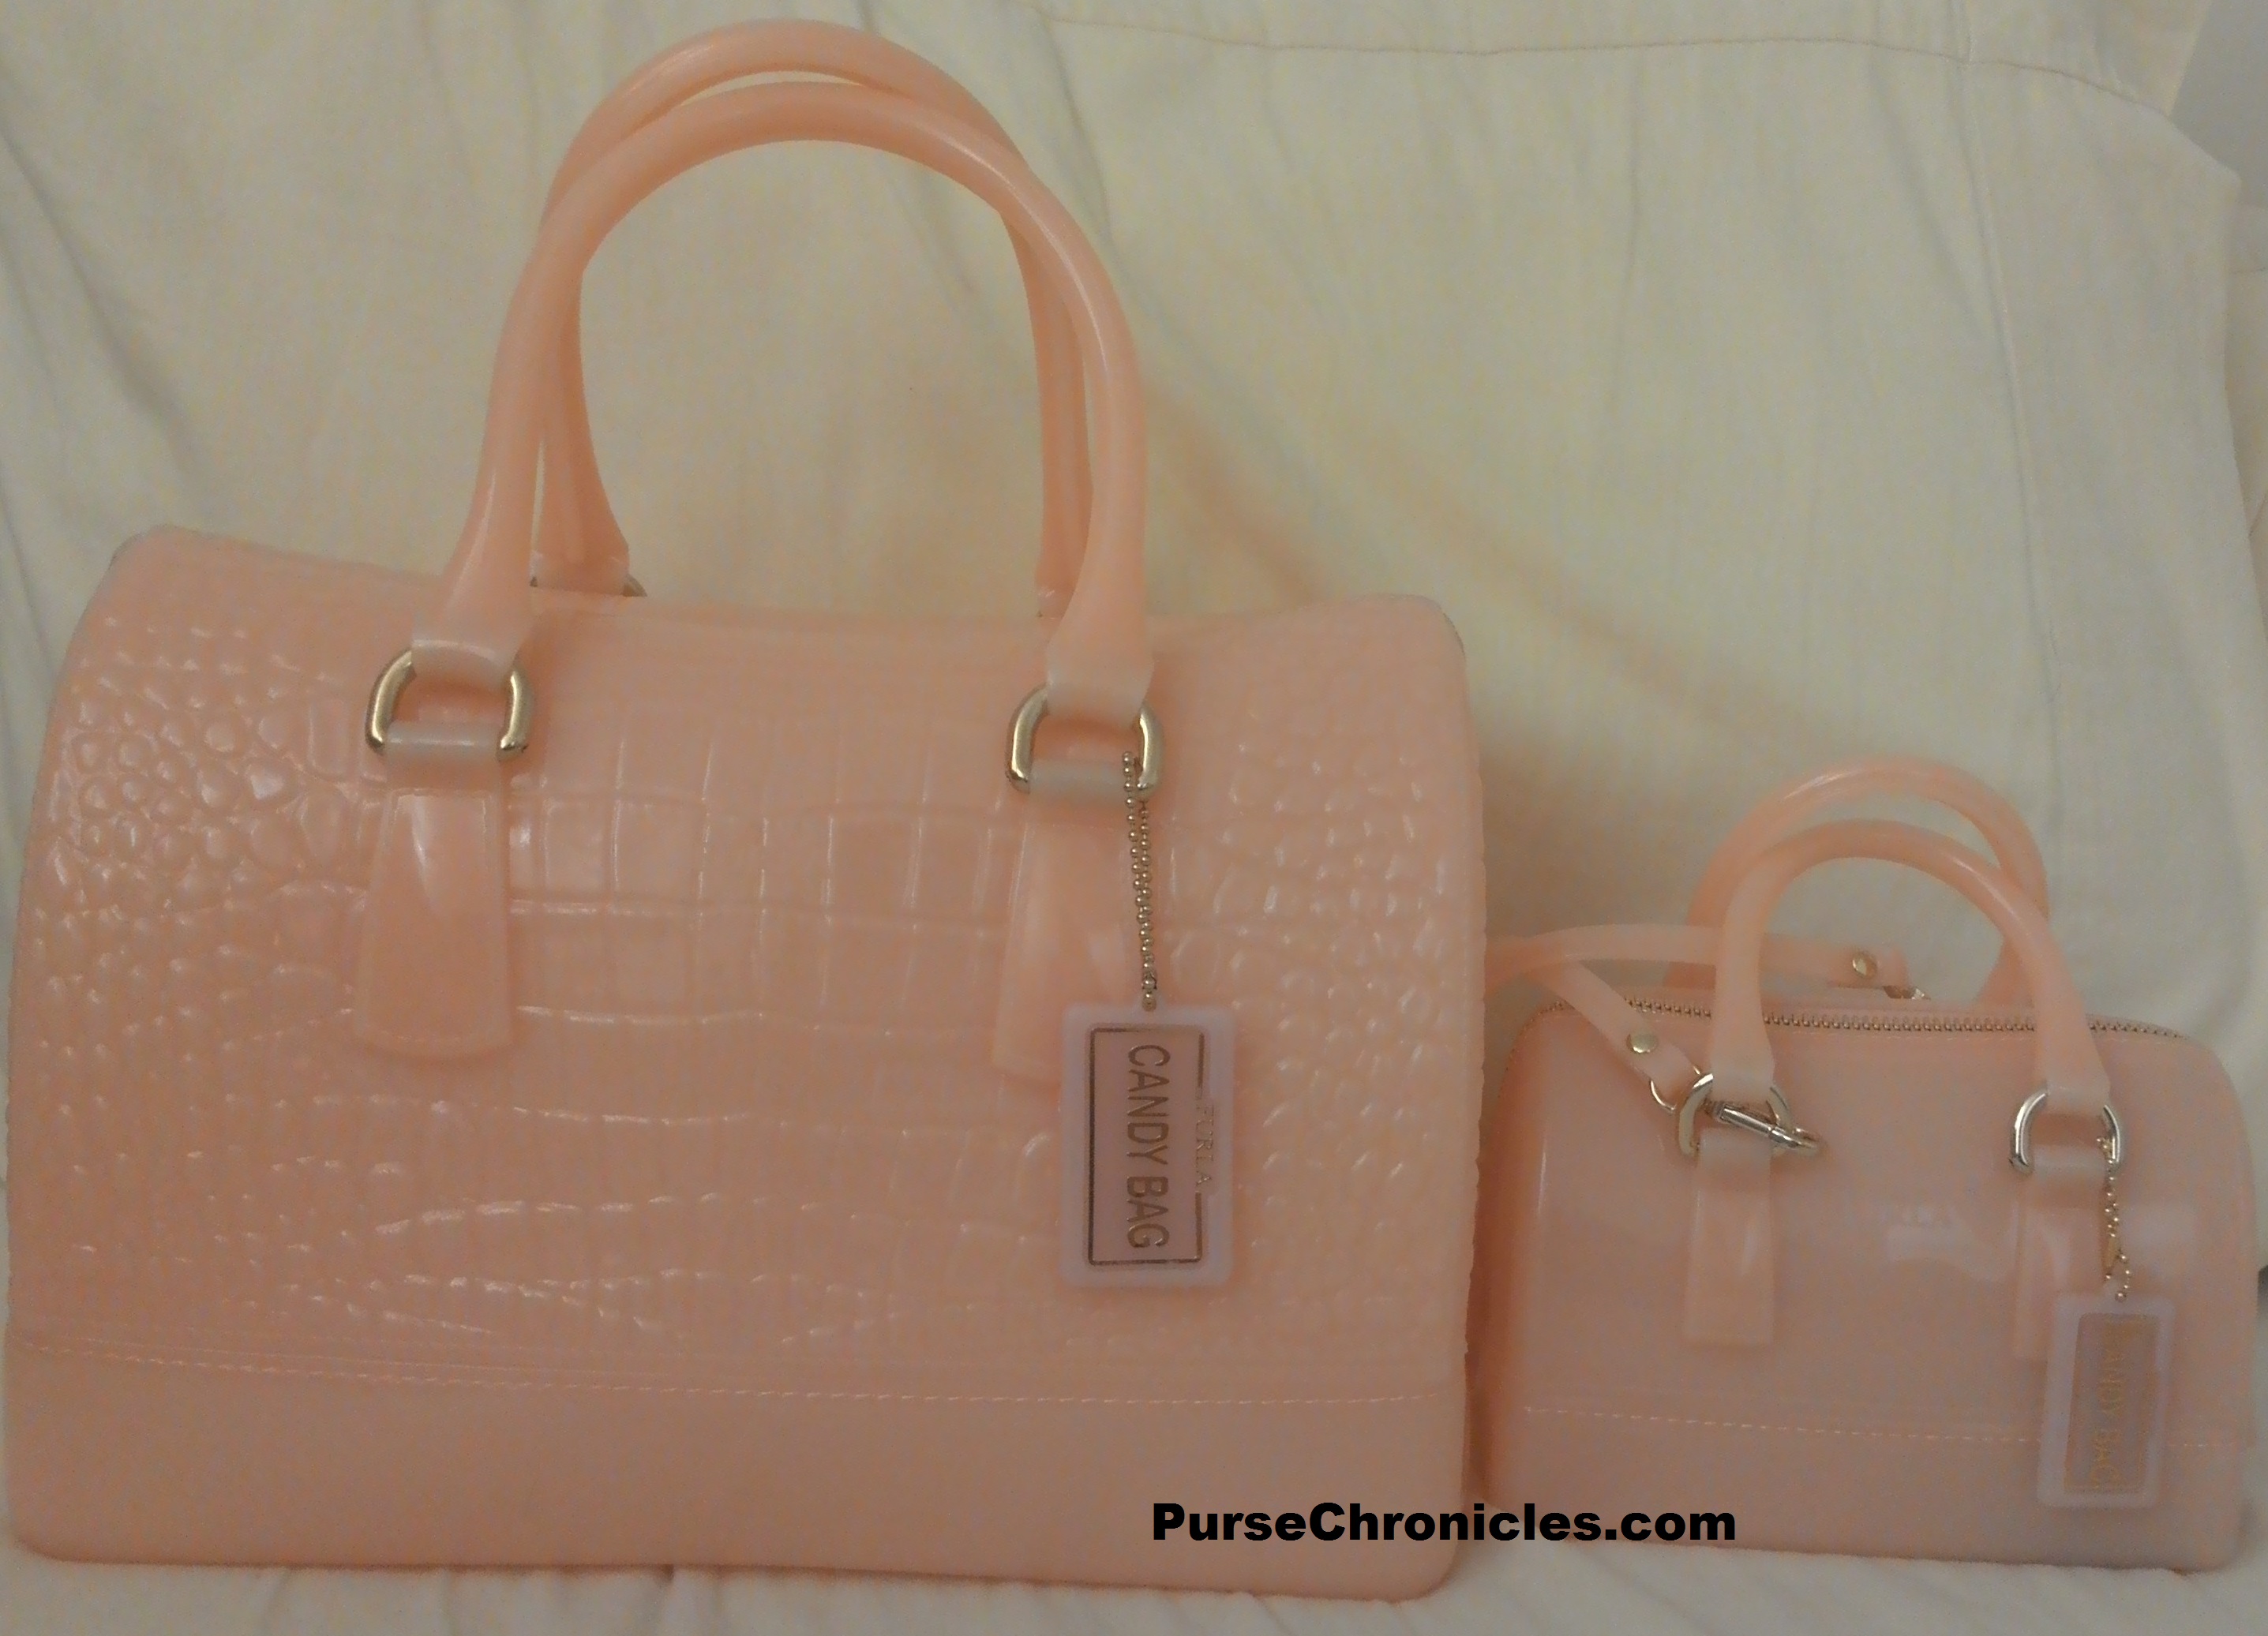 Purse Chronicles \u2013 The blog for \u0026quot;regular\u0026quot; people who happen to ...  